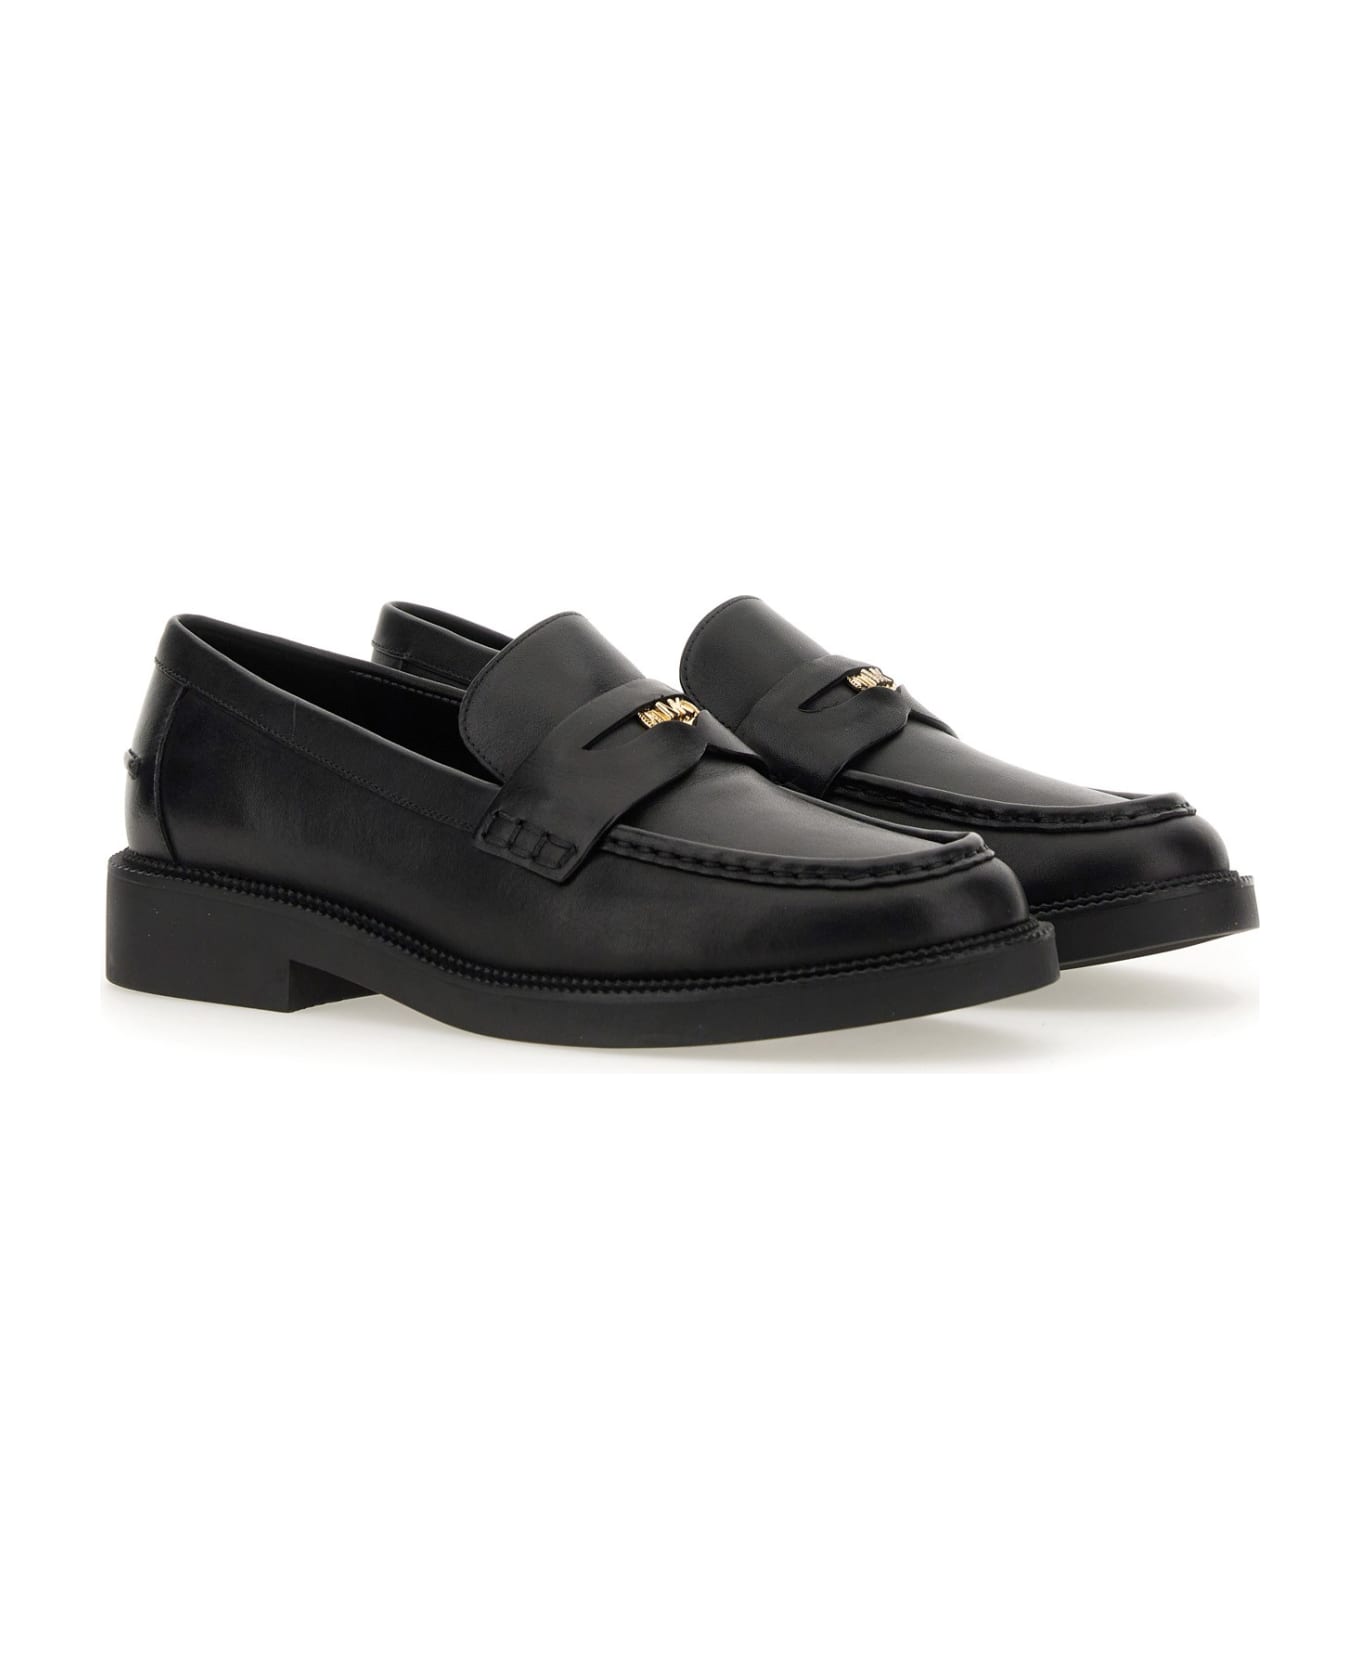 MICHAEL Michael Kors Loafer With Coin - NERO